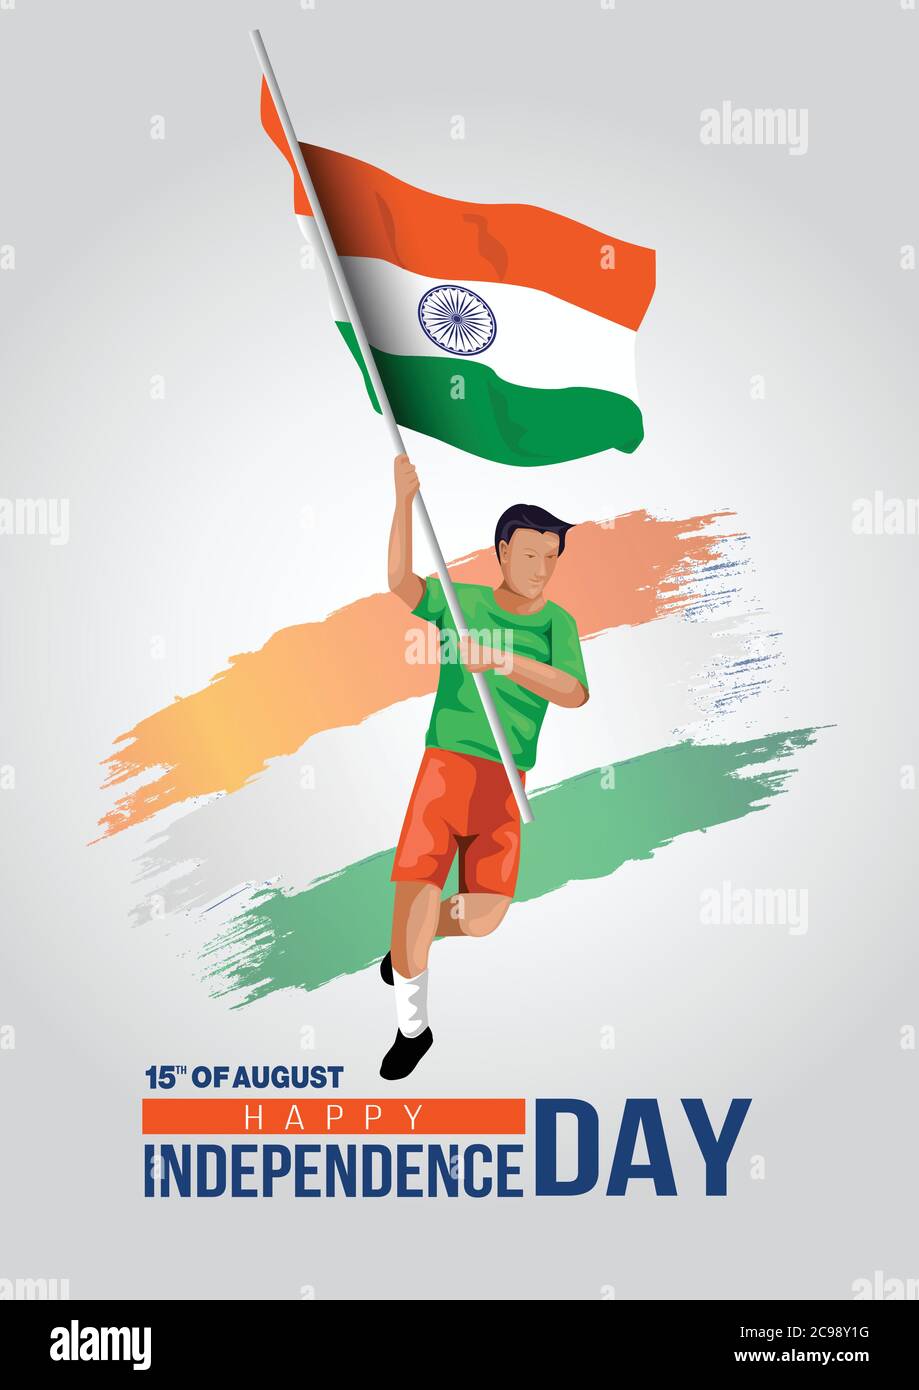 happy independence day India. vector illustration of Indian man with flag.poster, banner , template design Stock Vector